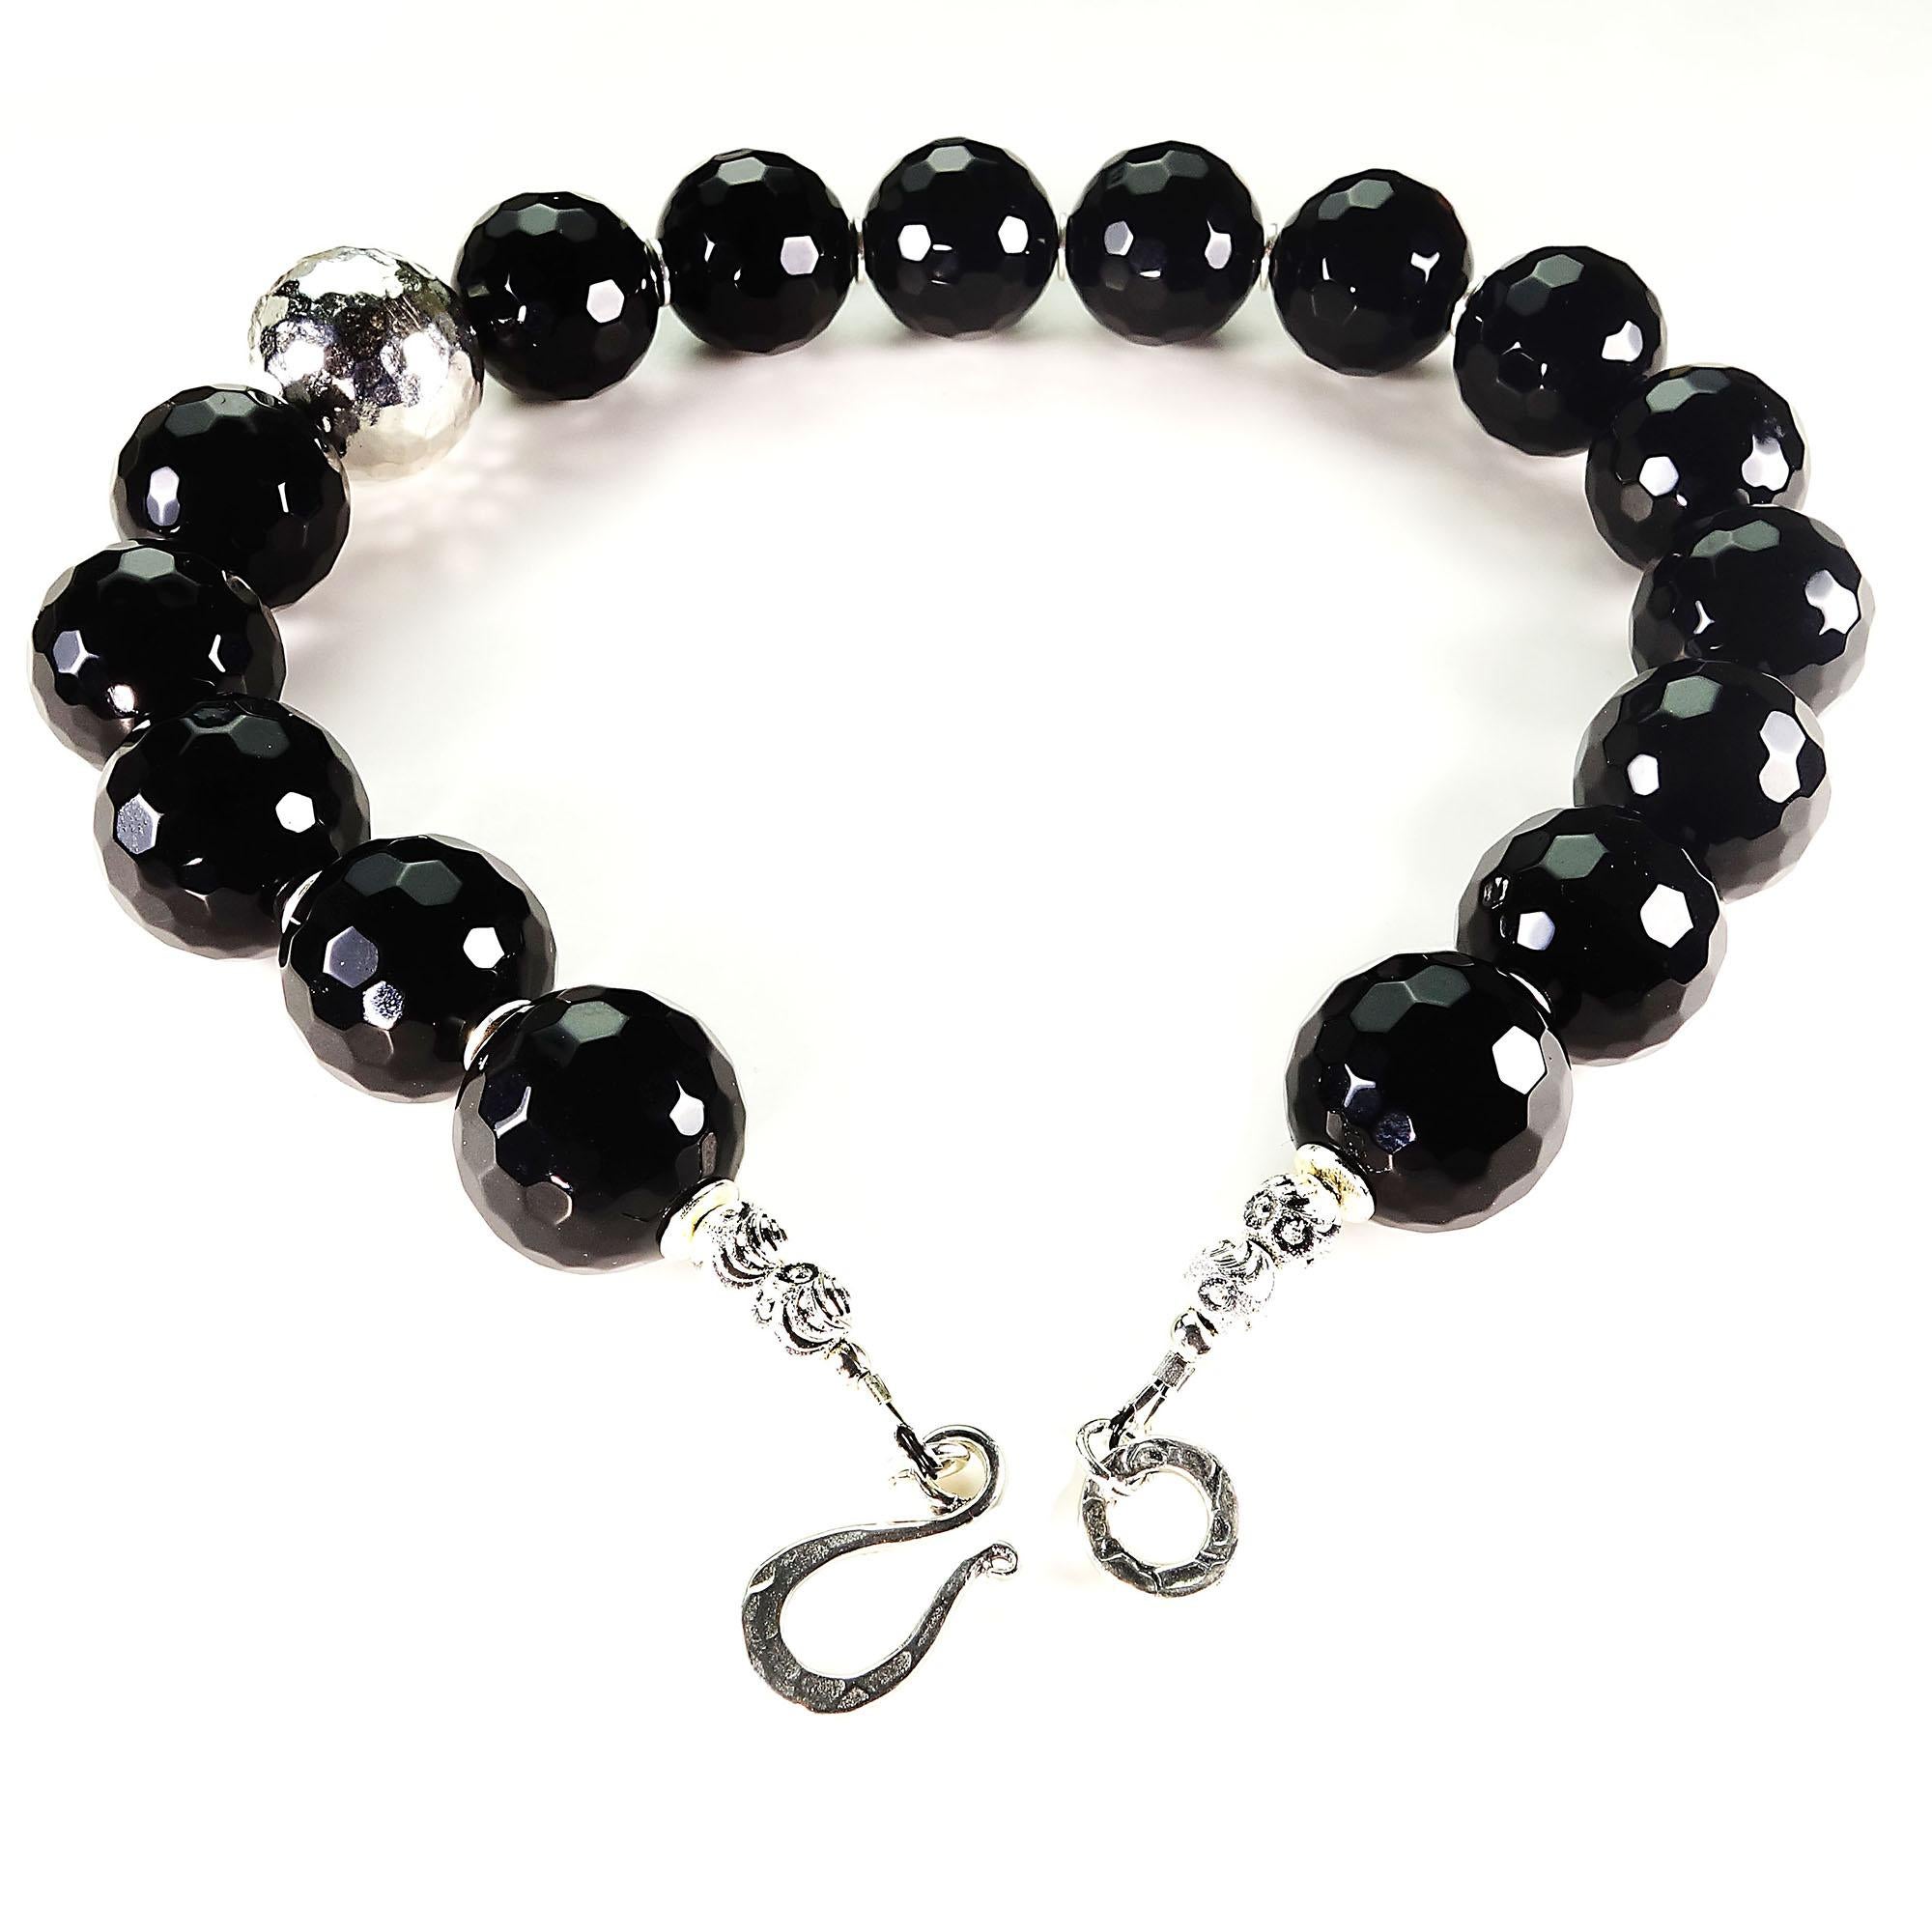 15.5 Inch, unique, handmade choker necklace of highly polished faceted Black Onyx with an off-center focal of faceted Pure Silver.  The Black Onyx is 18MM and the Pure Silver focal is 20MM.  This short choker sits on your neck and inside an open